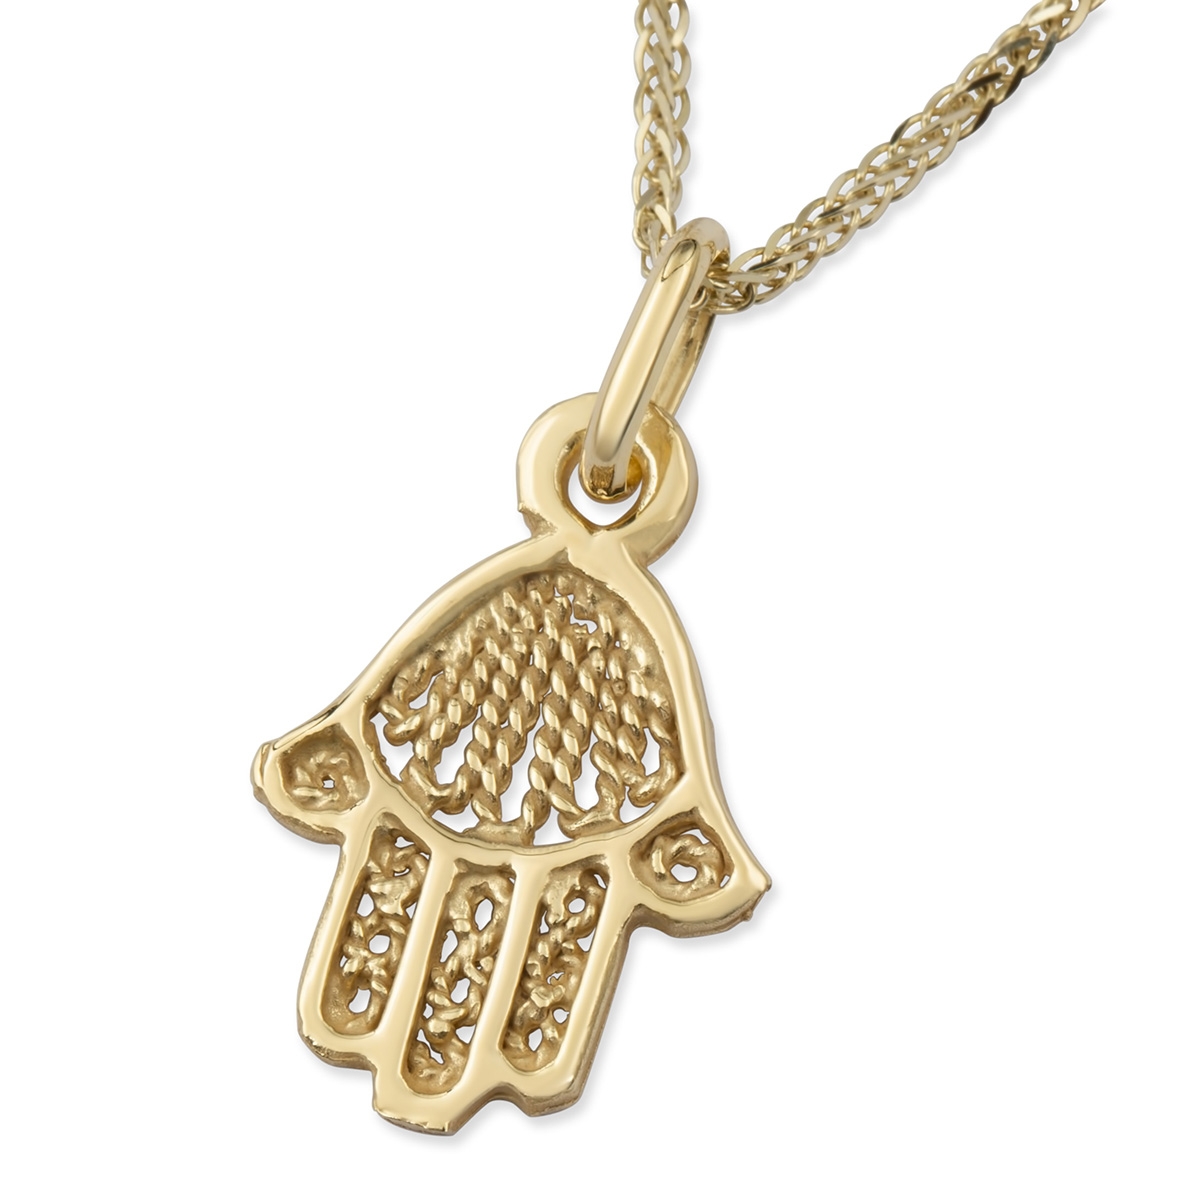 Chic 14K Yellow Gold Hamsa Pendant Necklace With Rope Filigree Design - 1